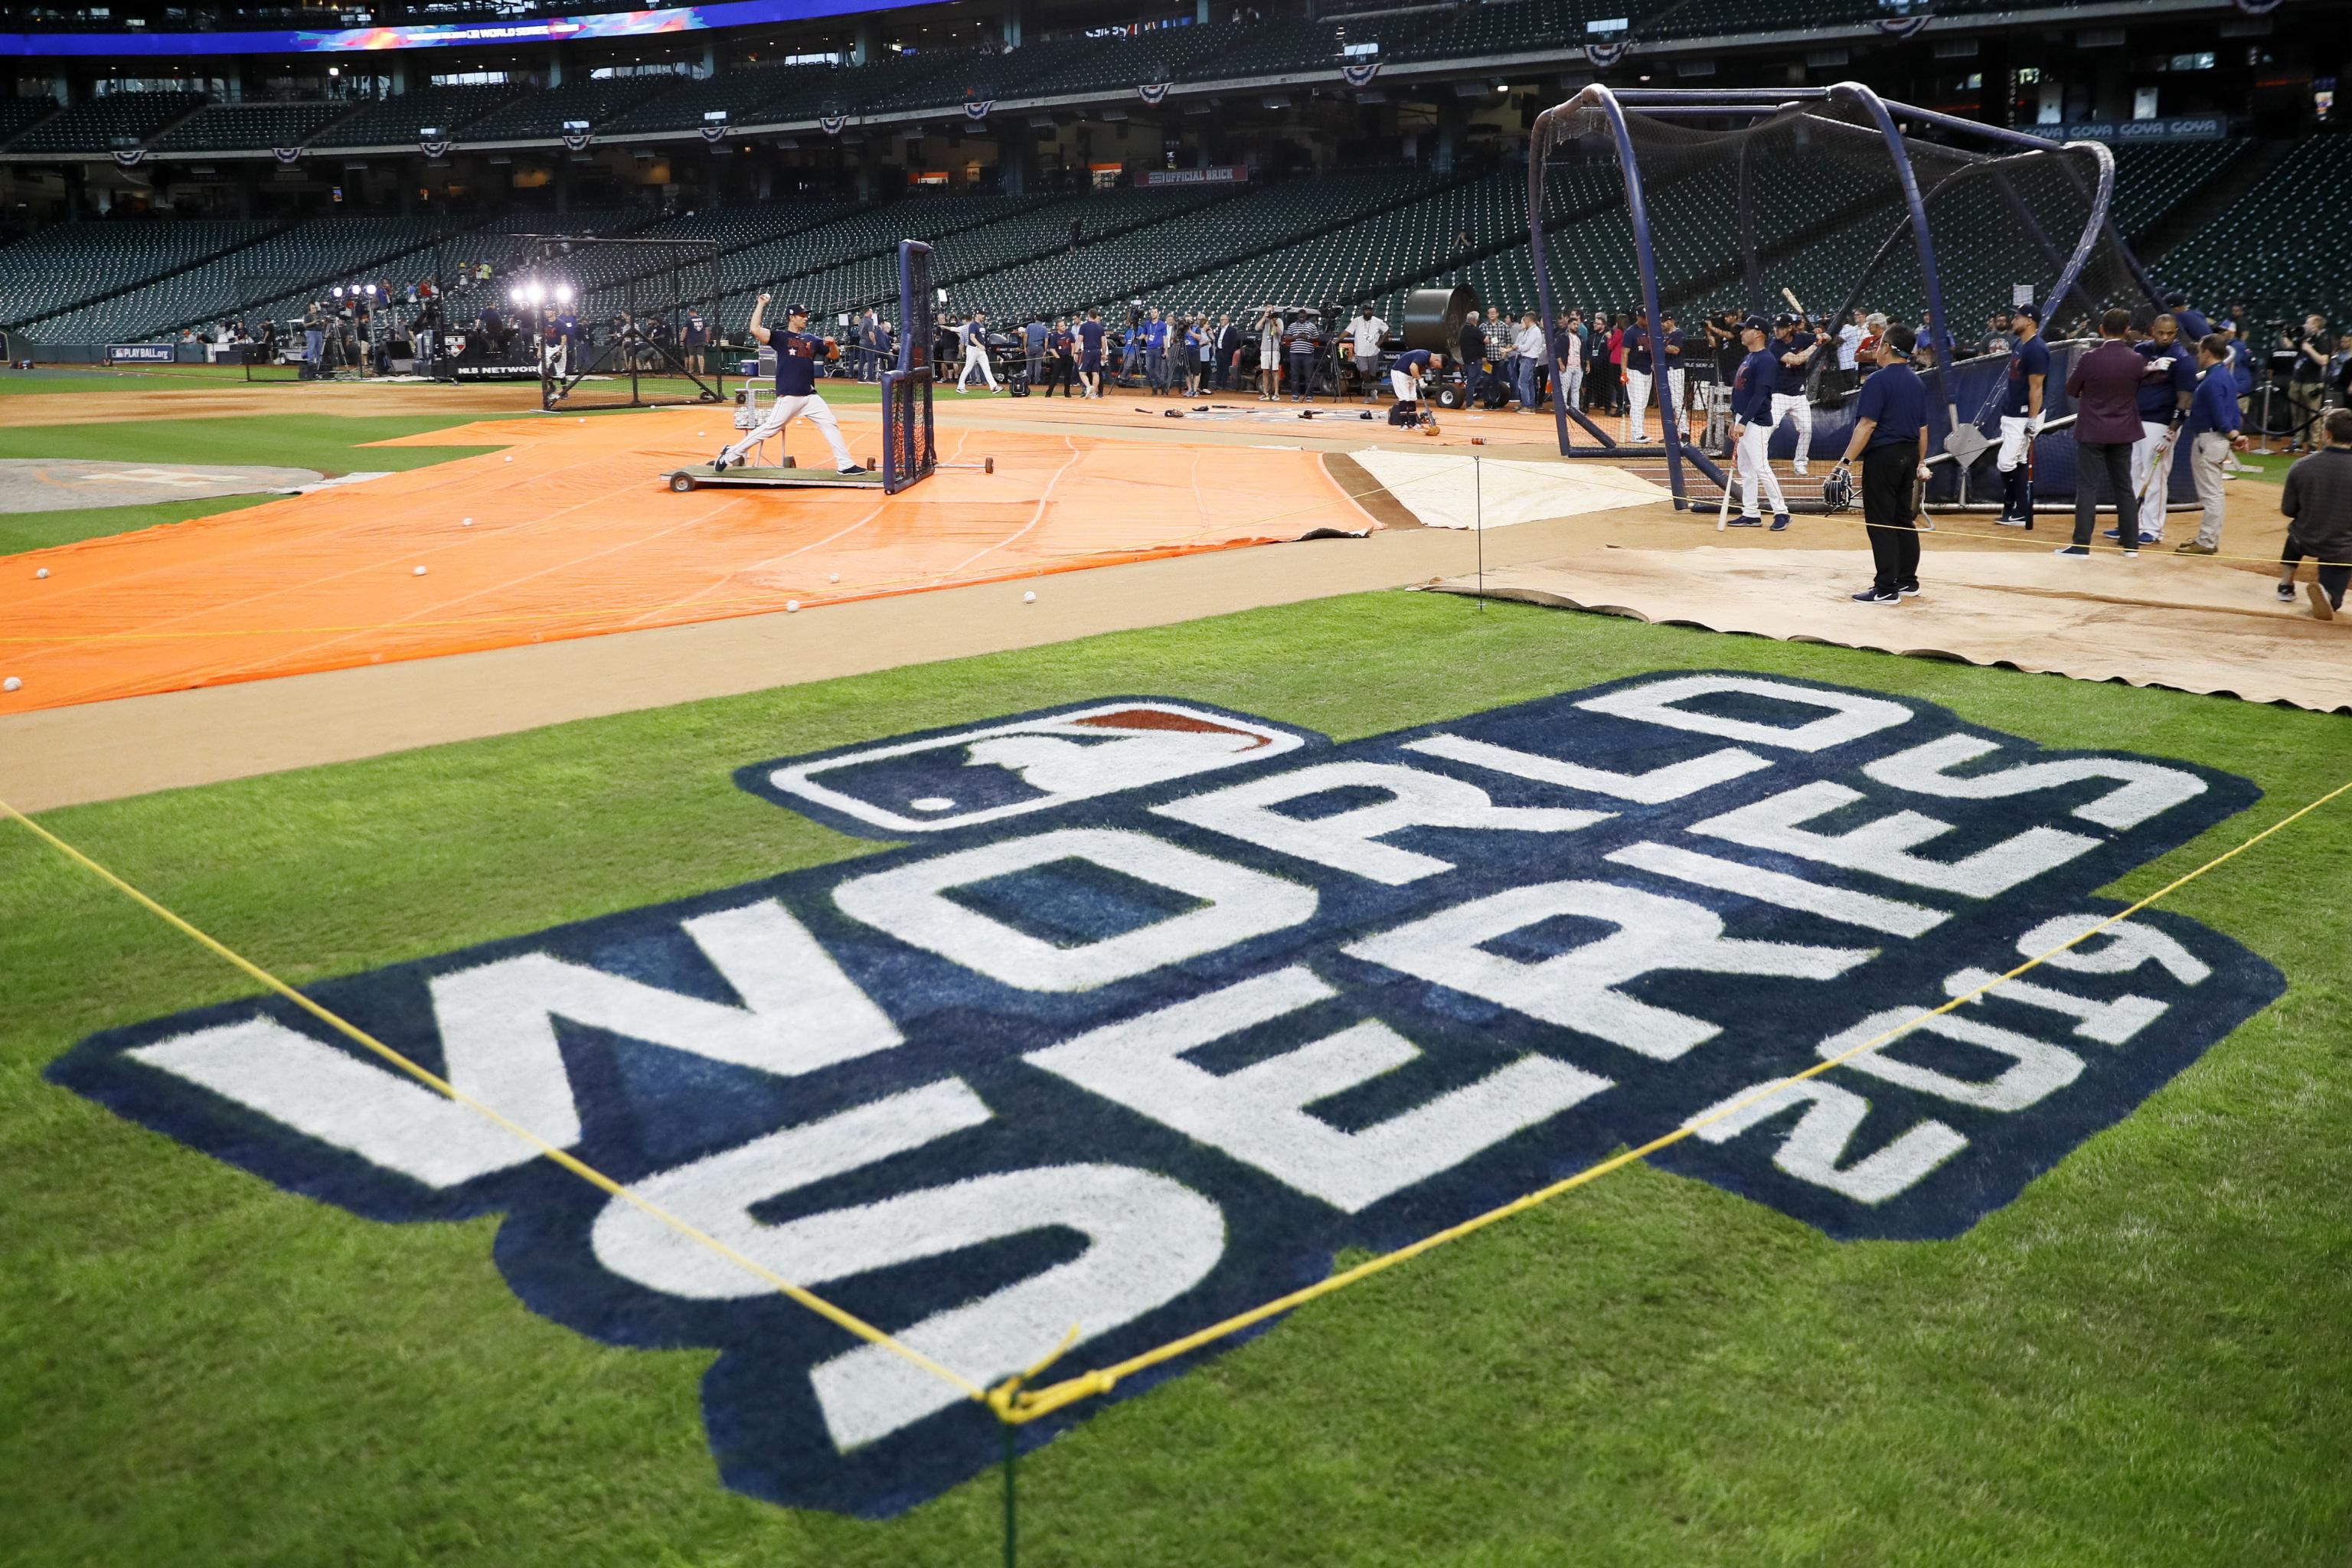 Nationals-Astros 2019 World Series Game 1 Preview